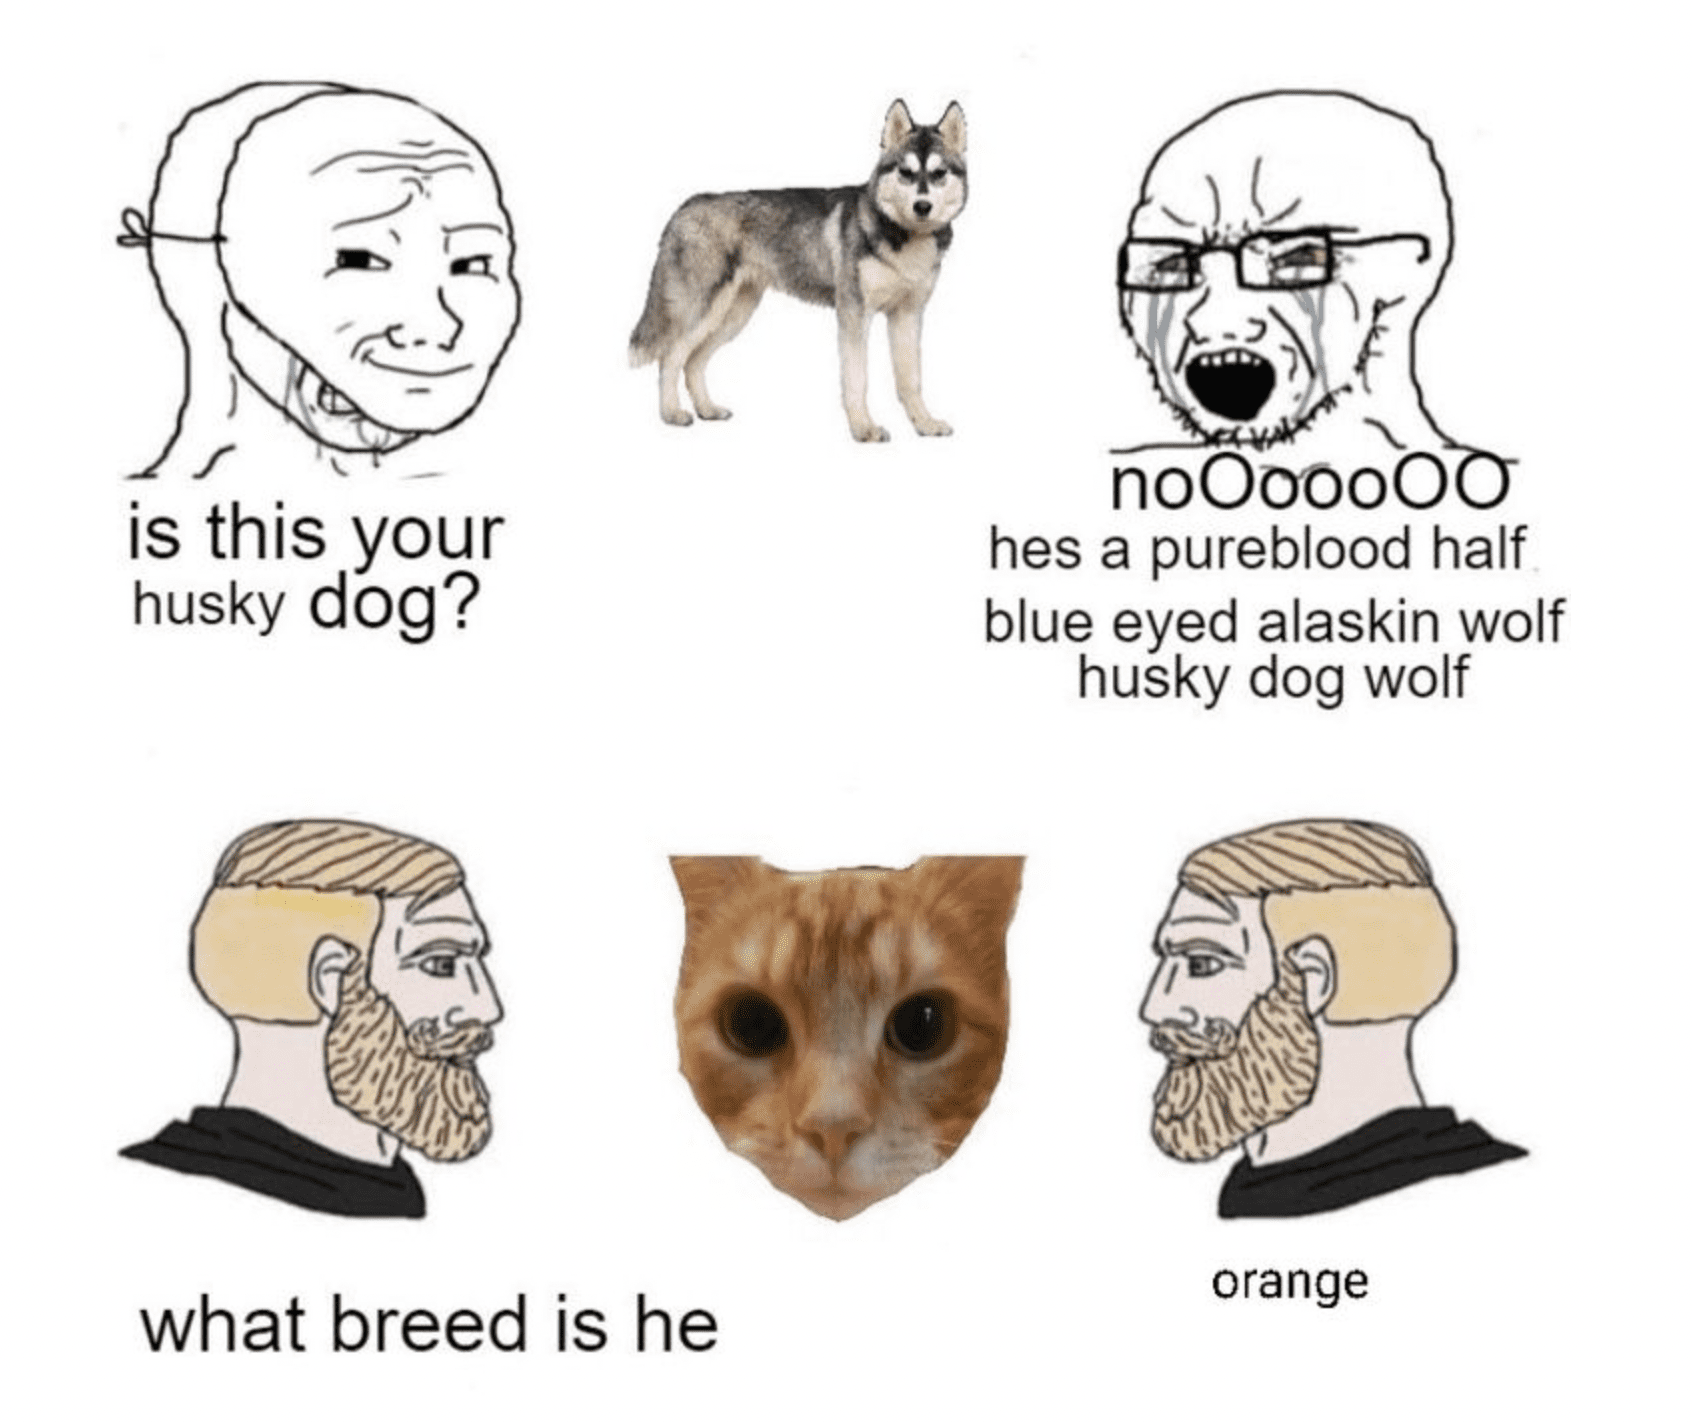 https://bram-adams.ghost.io/content/images/2023/02/what-breed-is-he-orange.png